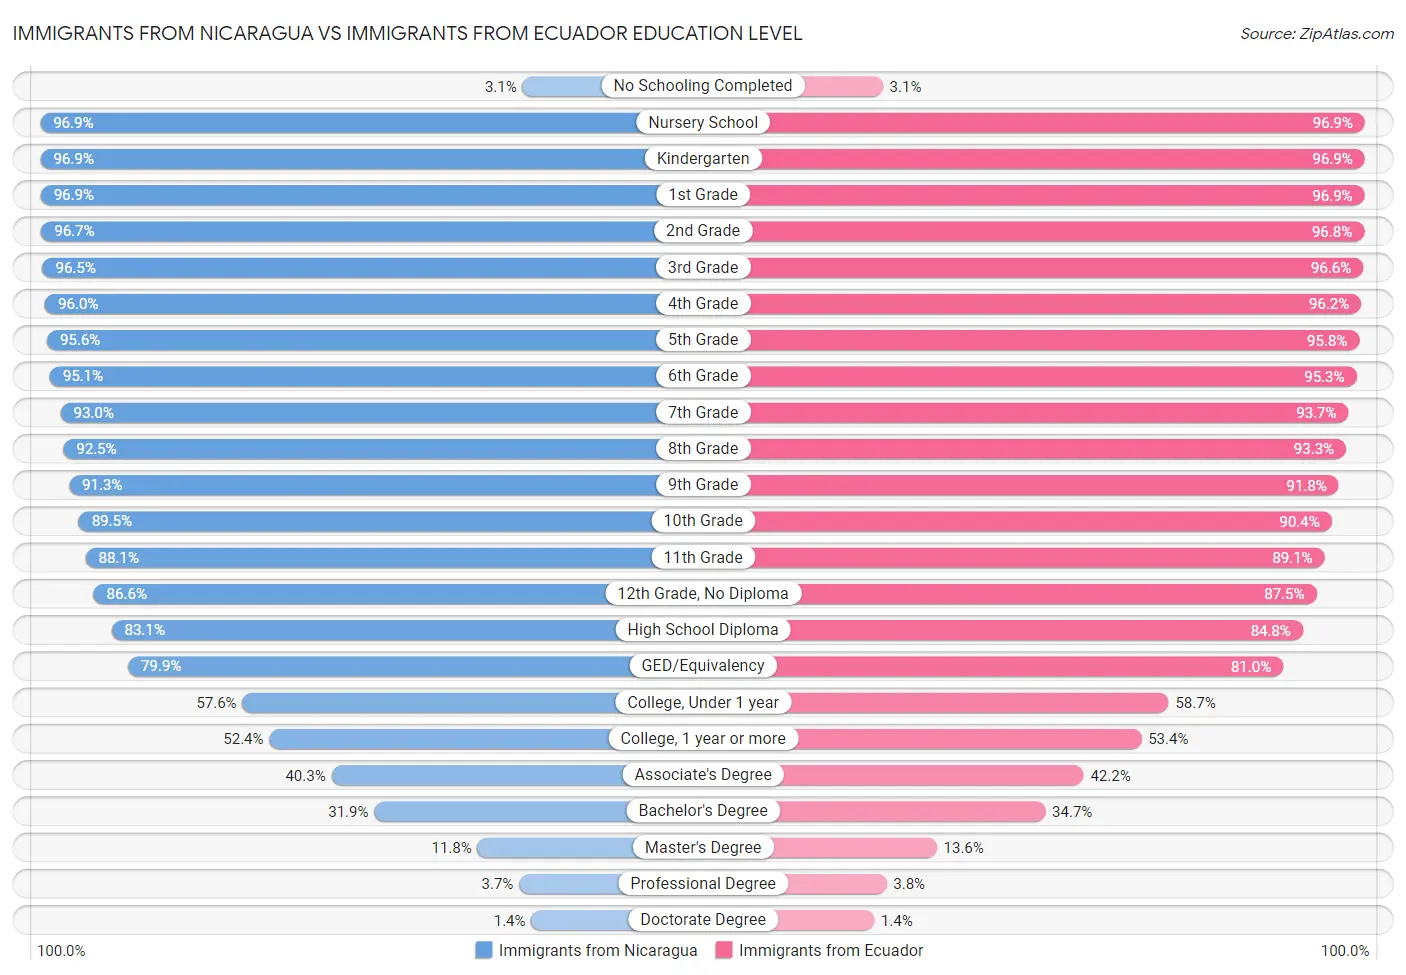 Immigrants from Nicaragua vs Immigrants from Ecuador Education Level